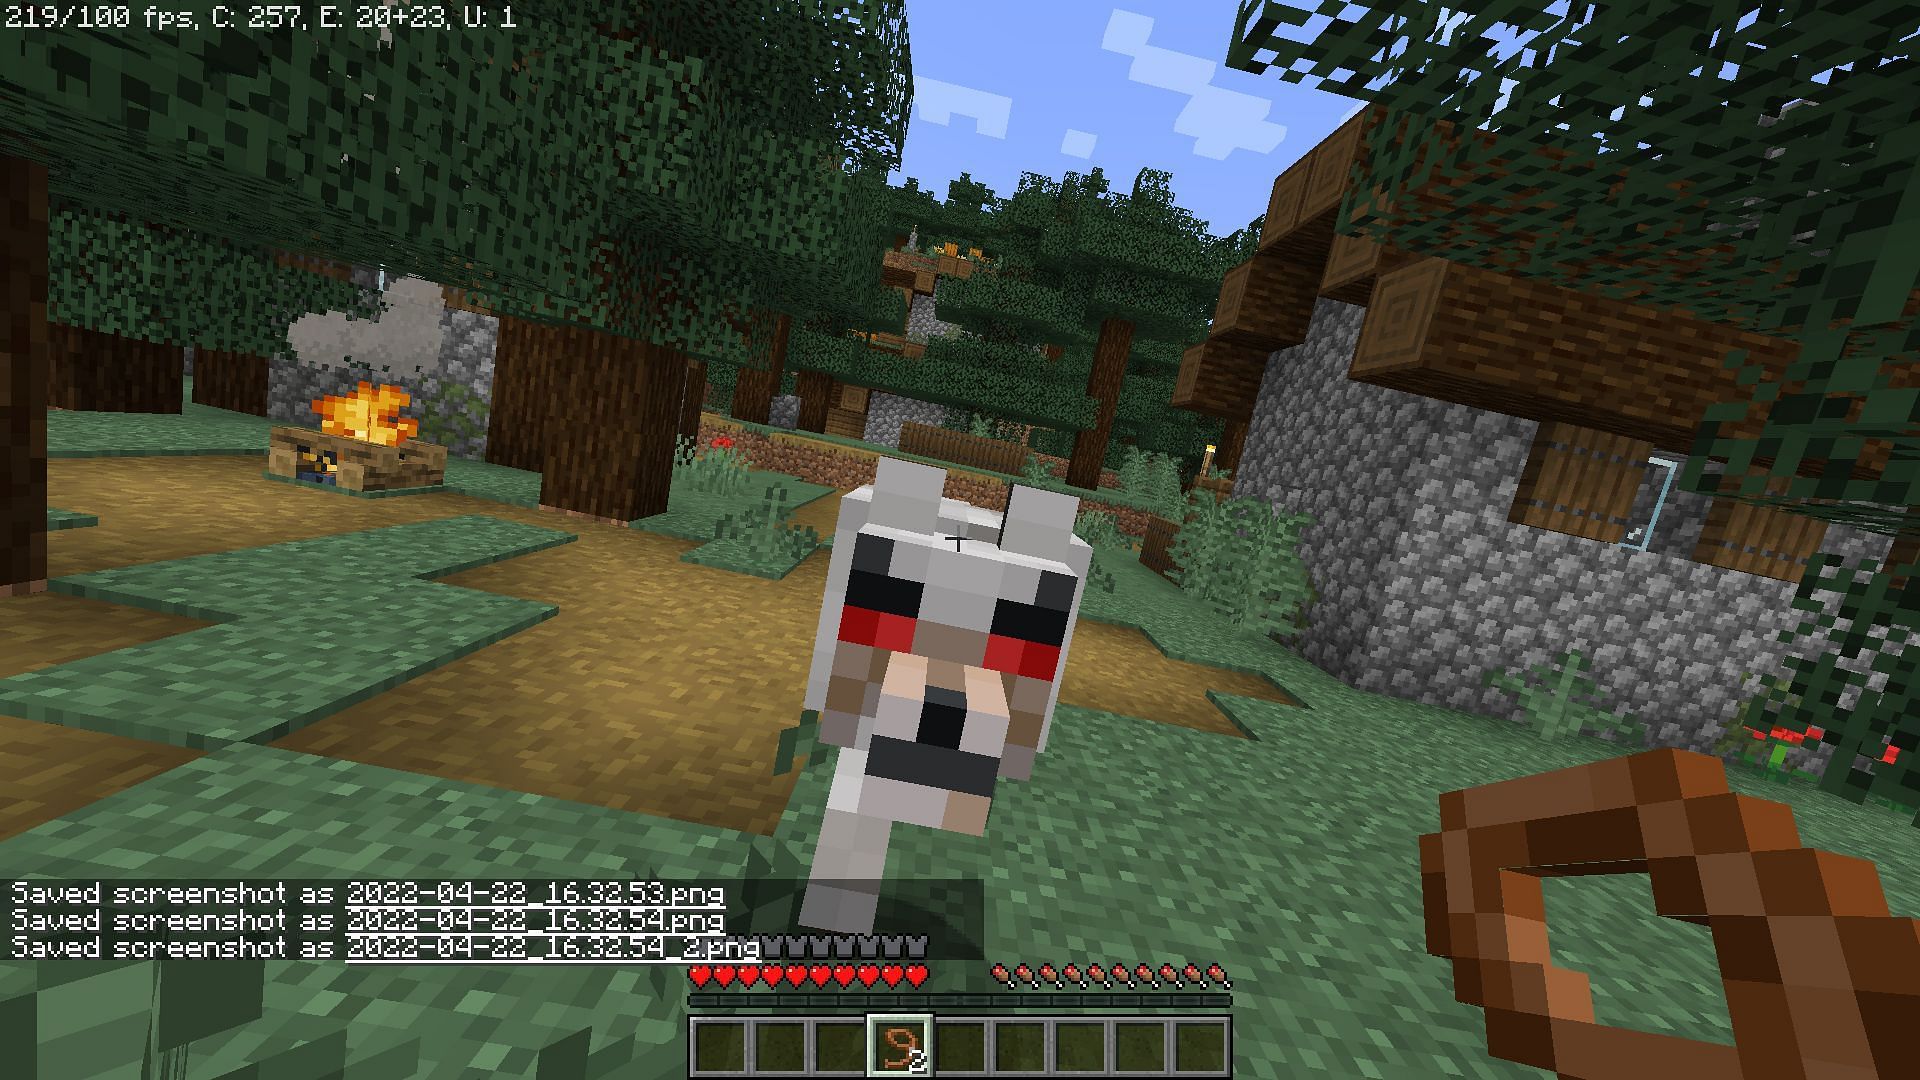 Angry wolves cannot be tamed (Image via Minecraft)